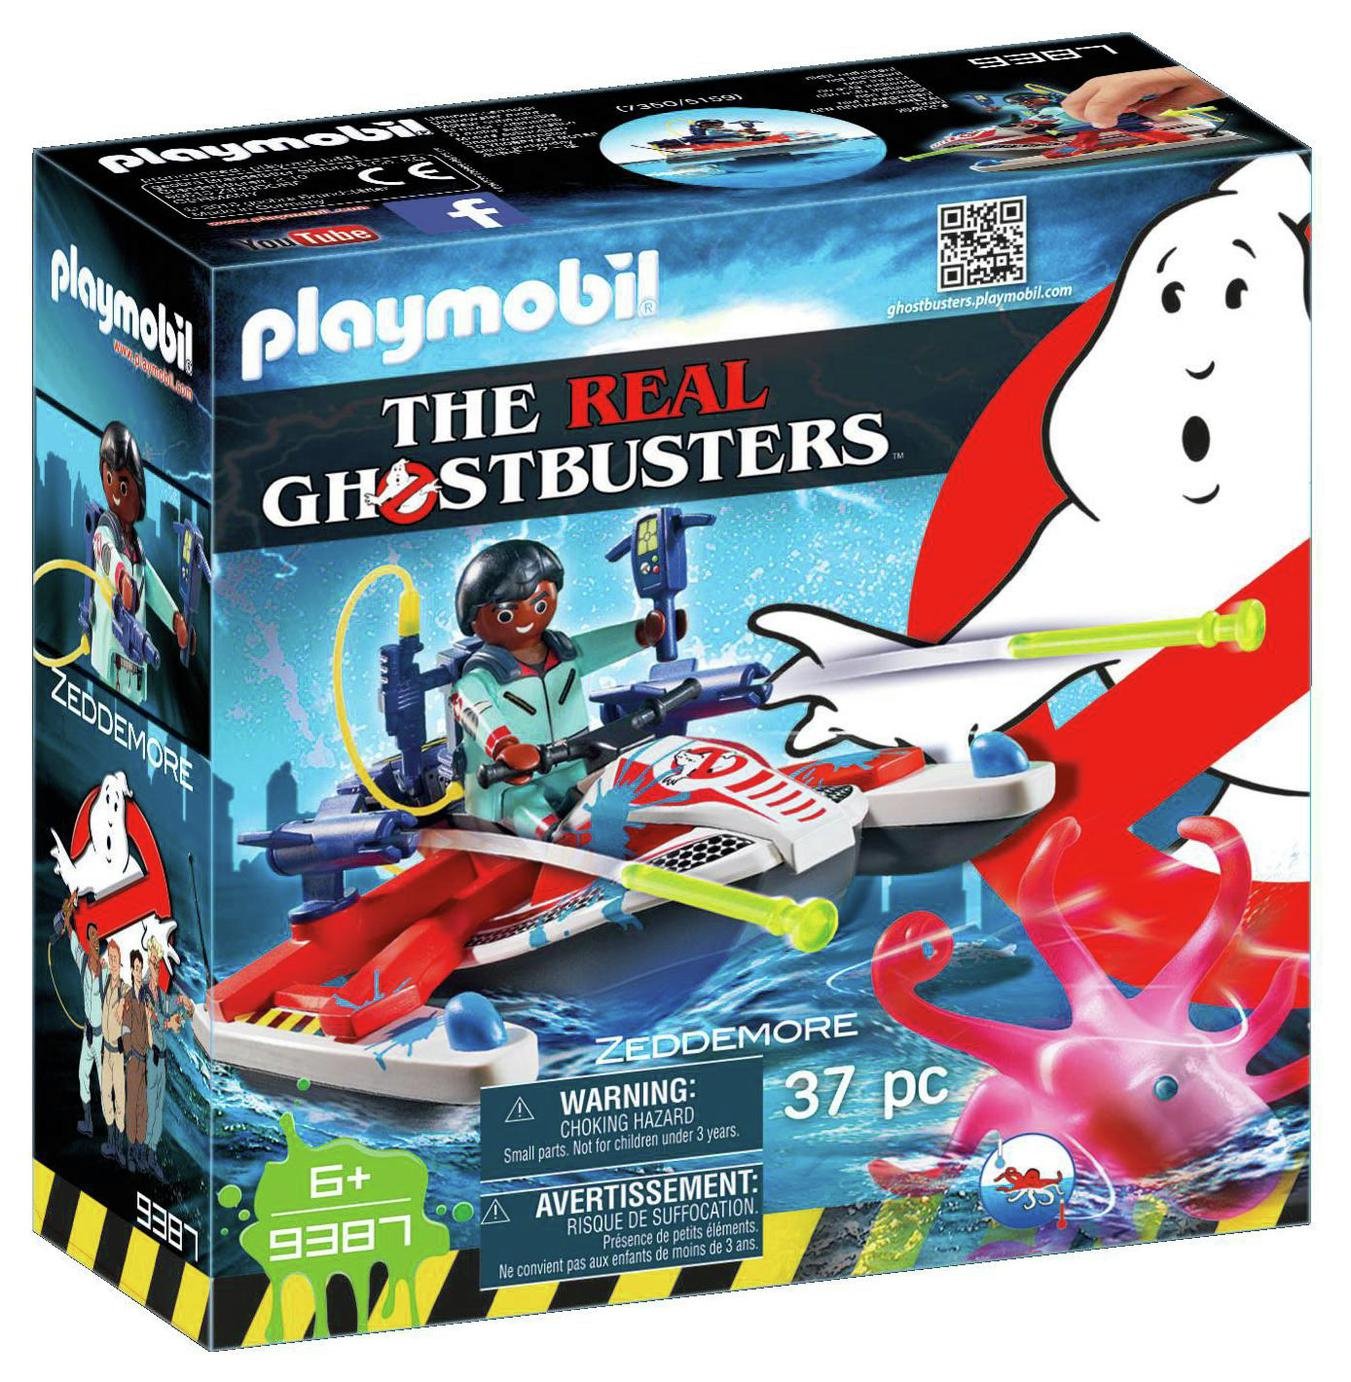 Playmobil 9387 Ghostbusters Zeddemore with Aqua Scooter